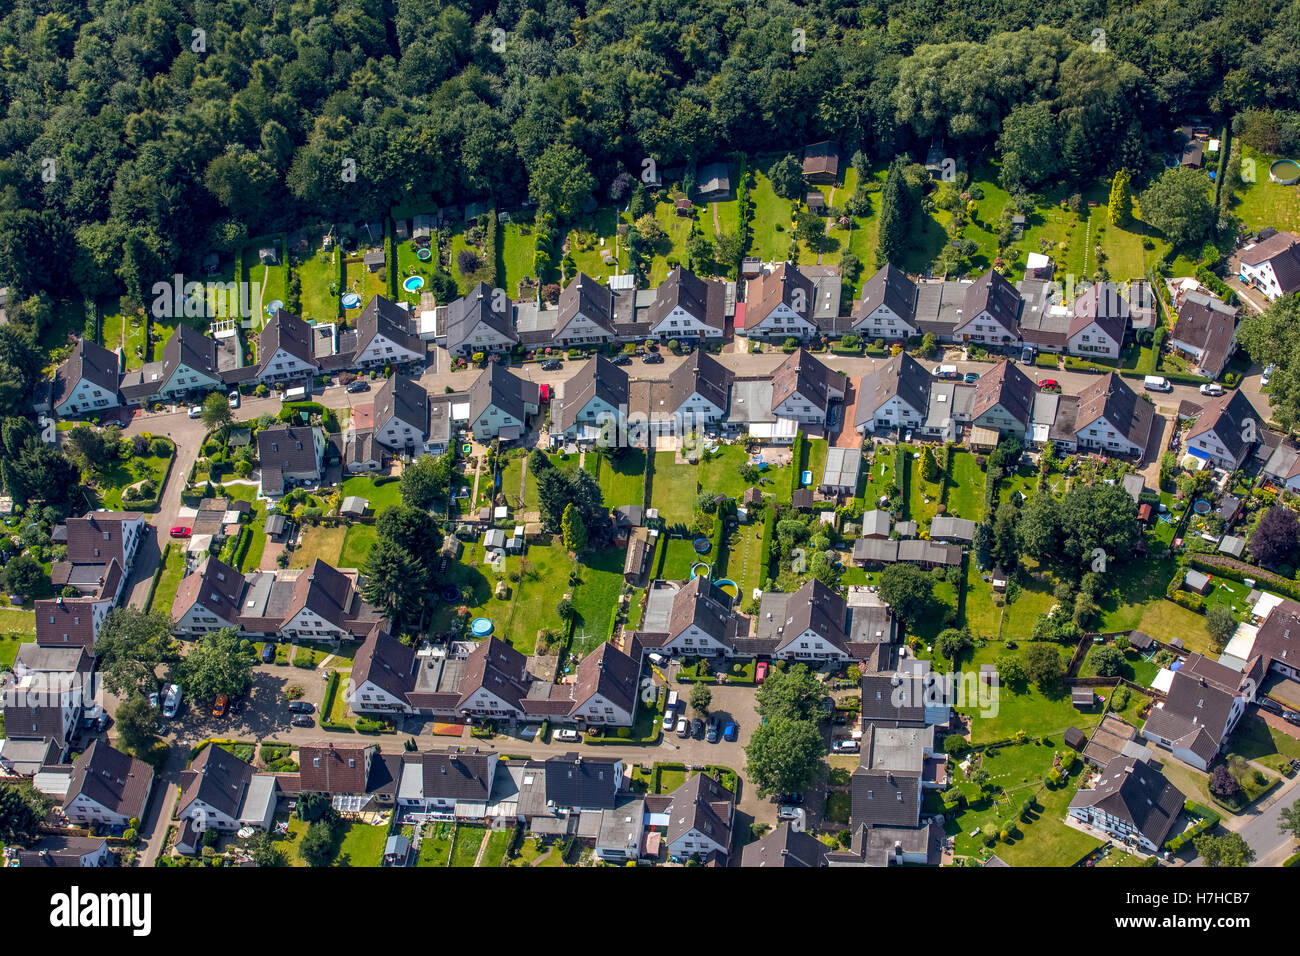 Aerial view, Bochum settlement Dahlhauser Heide Hordel, colliery houses, housing estate for the Hannover colliery, Krupp, rows Stock Photo